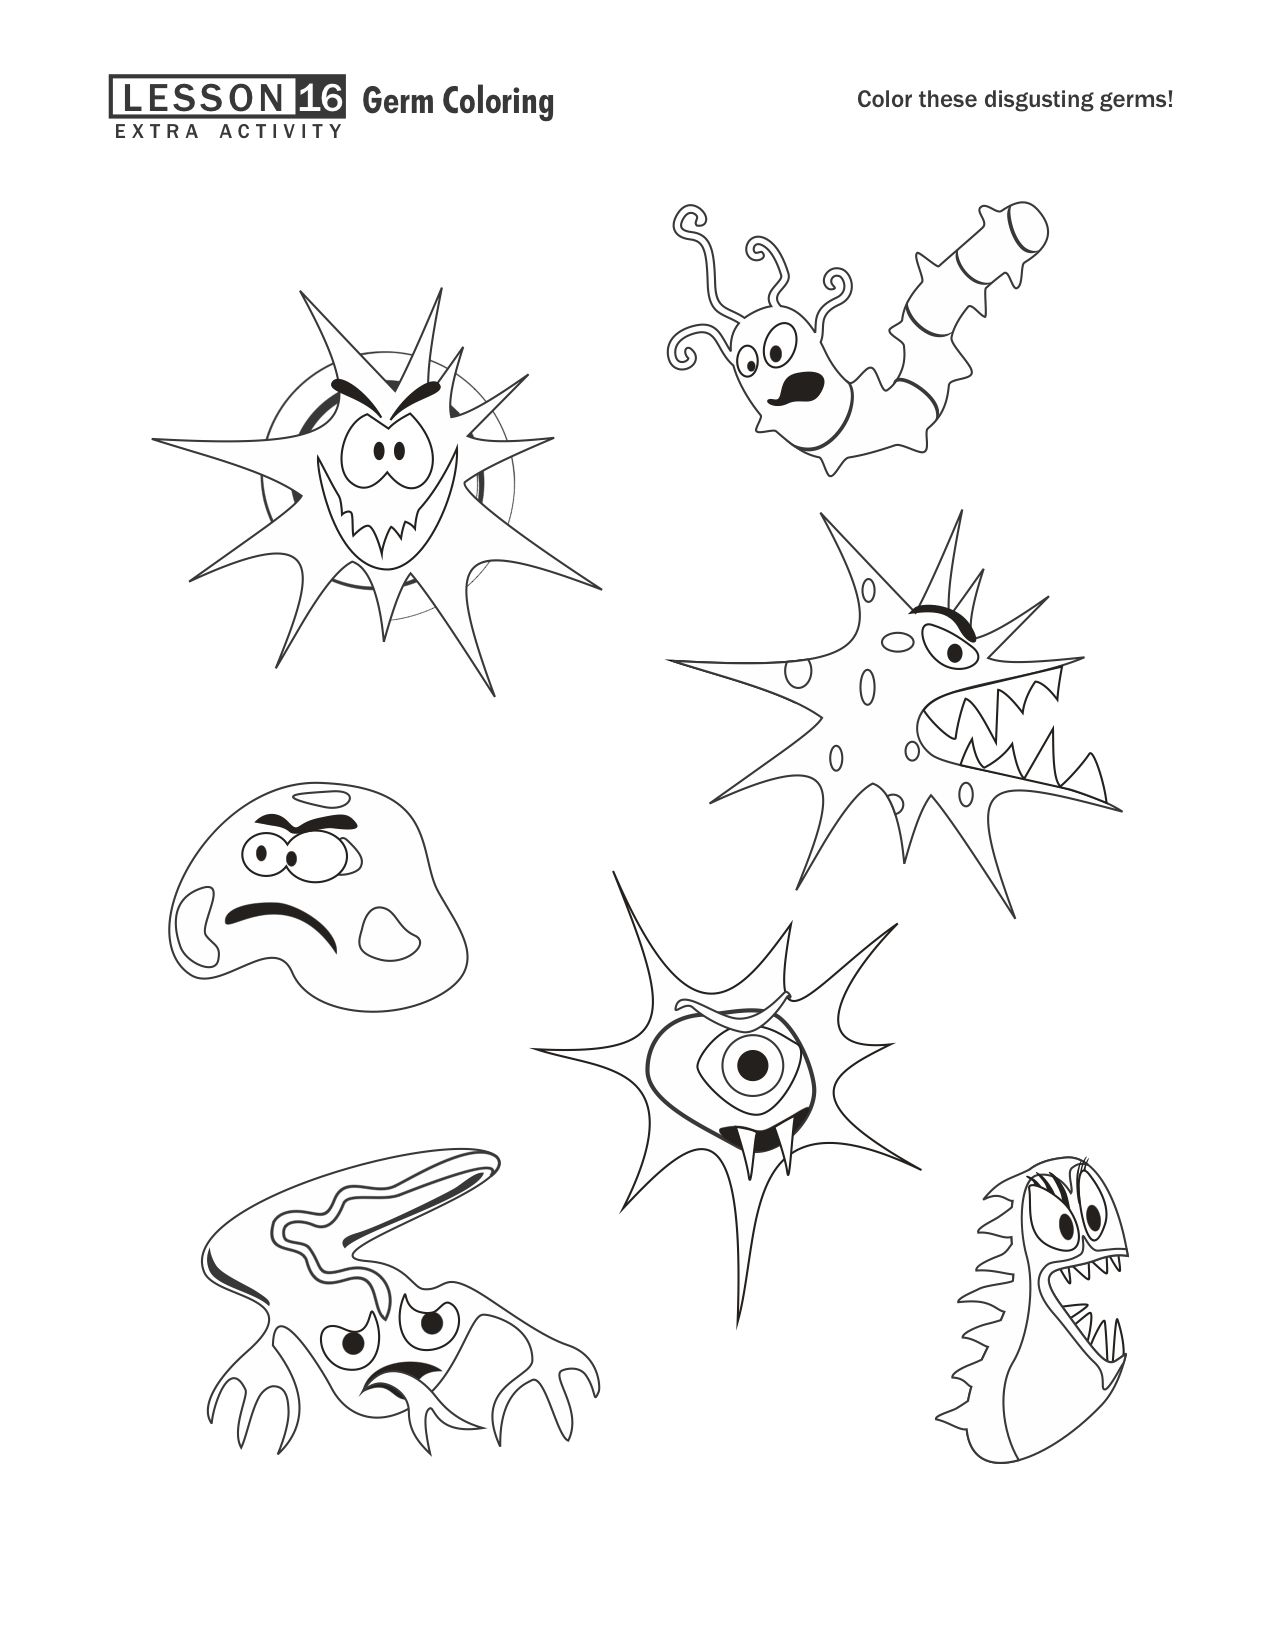 germ coloring sheet bacteria coloring pages at getcoloringscom free germ coloring sheet 